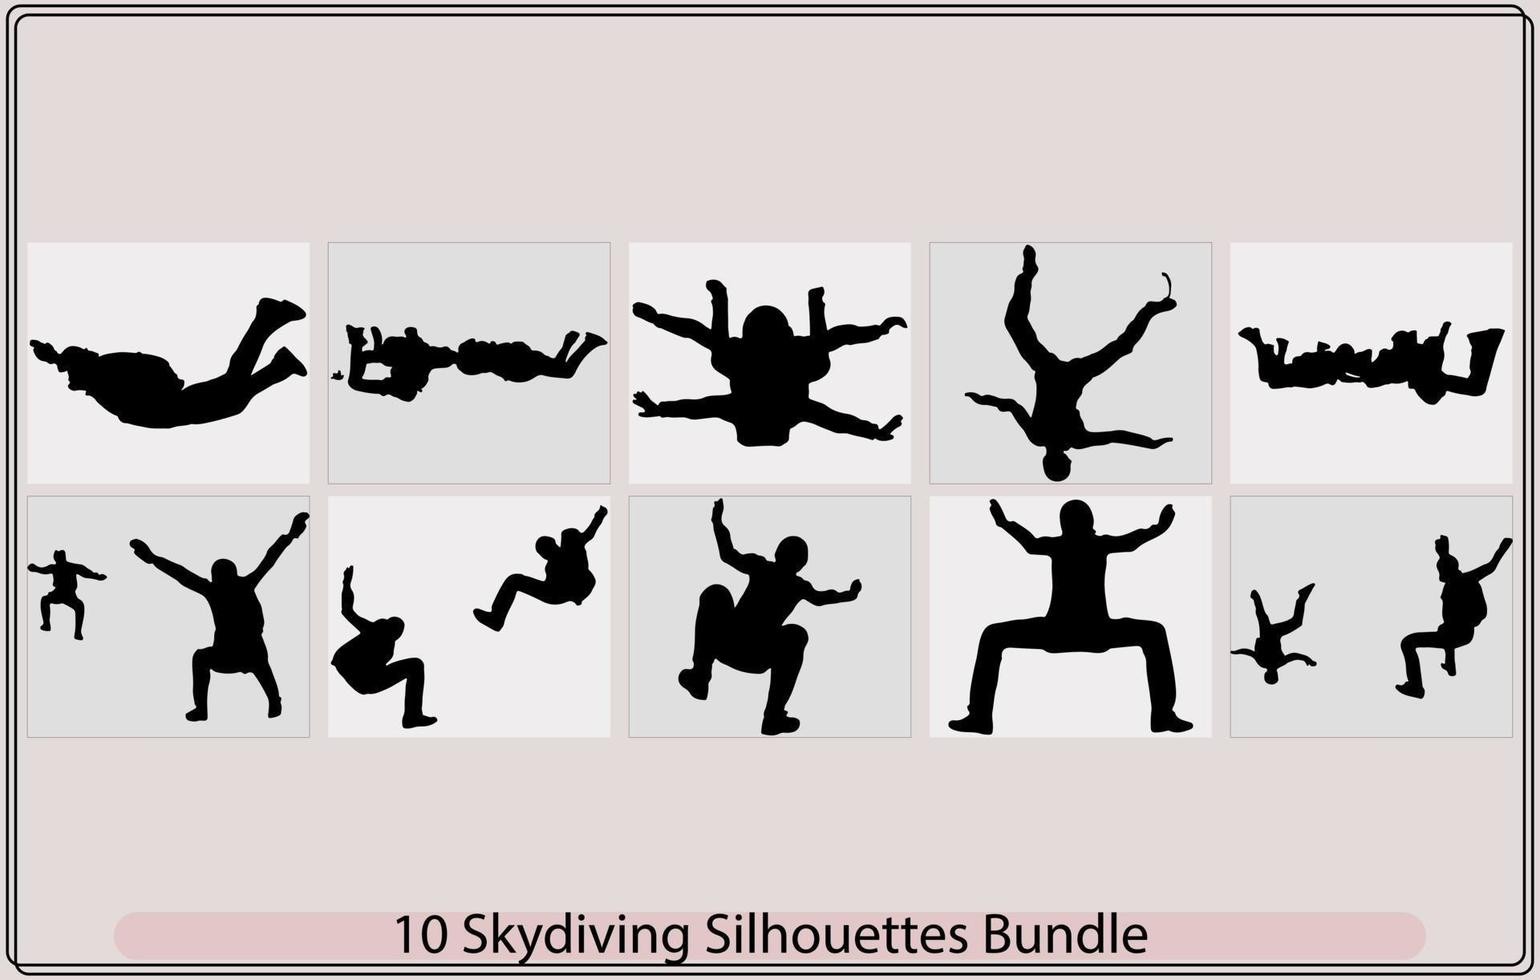 Abstract skydiver paint,Black Silhouettes Hang Glider or Parachute skydiving,Set of Skydivers, Parachuting Silhouettes. Vector Image,